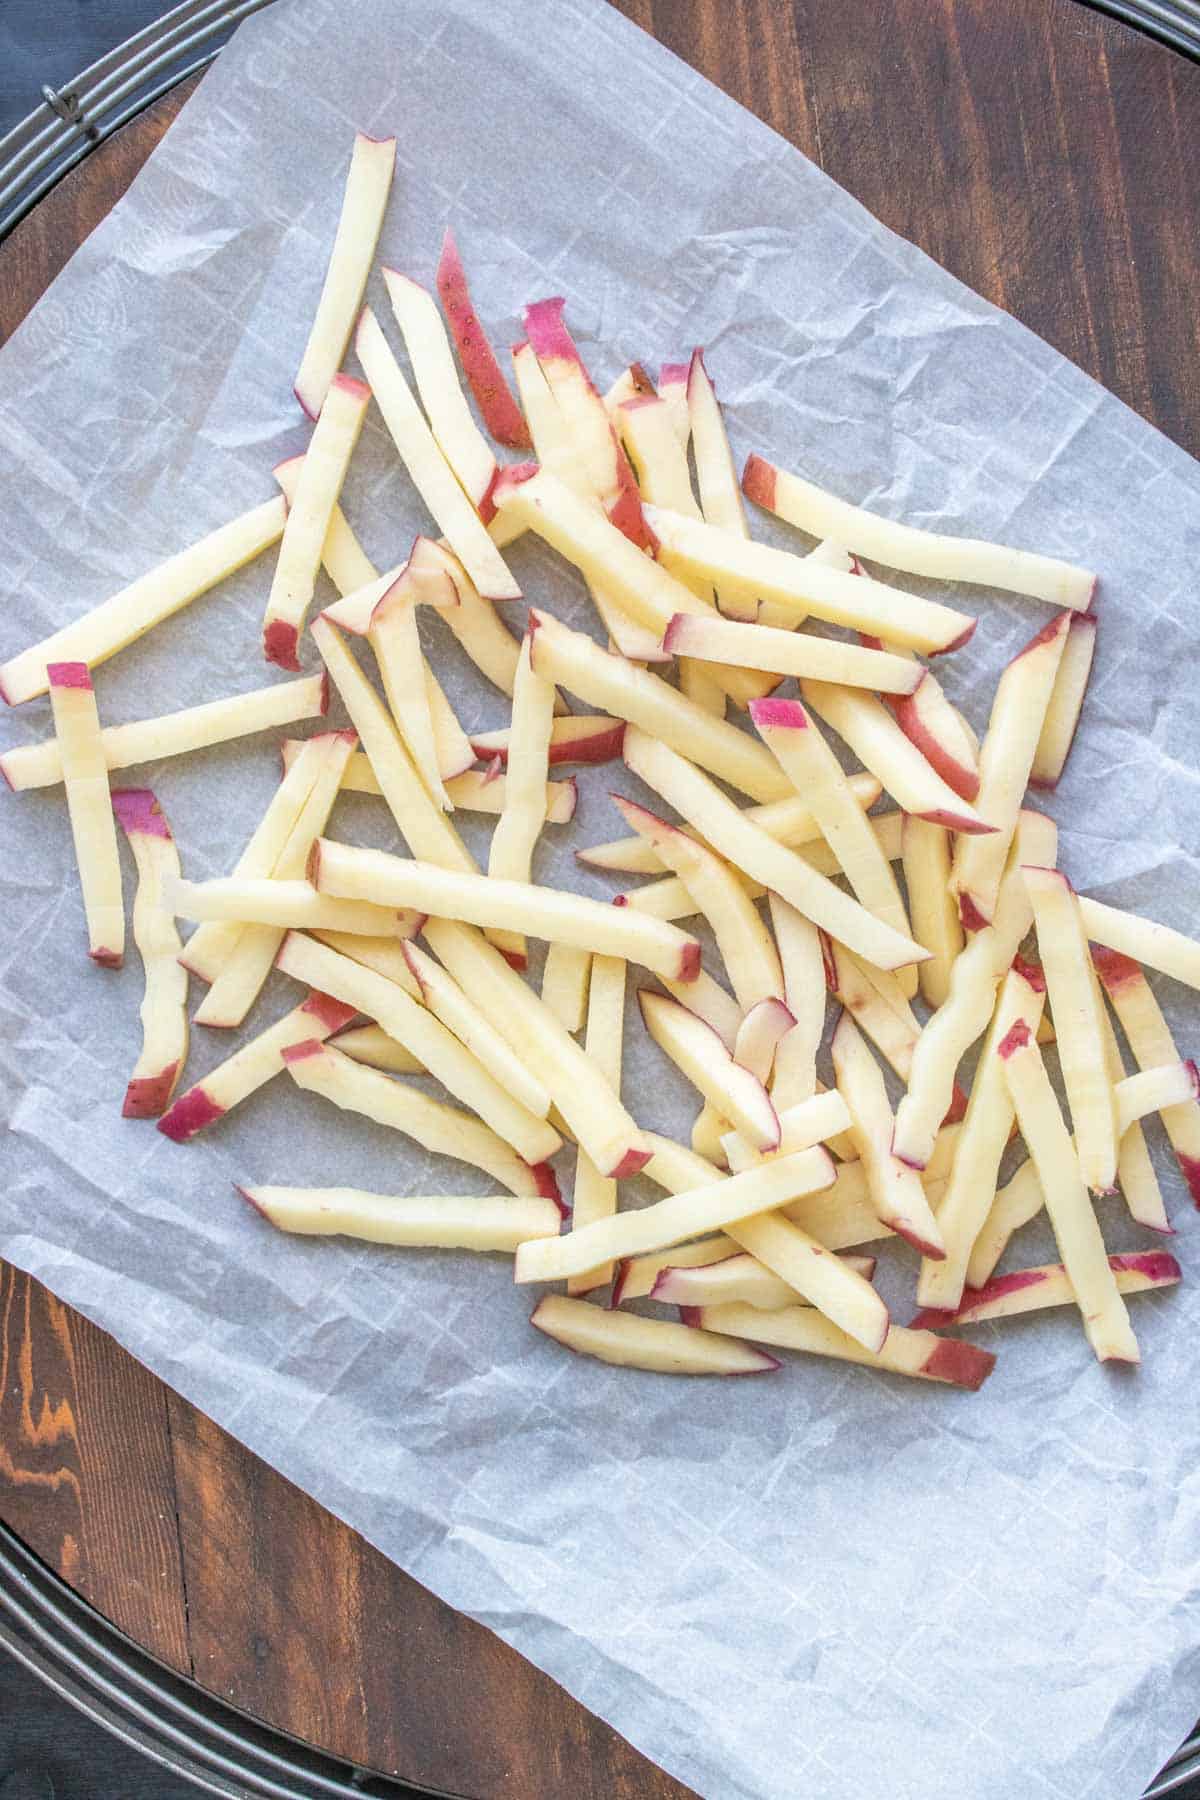 Raw potatoes cut into matchstick slices on a piece of parchment